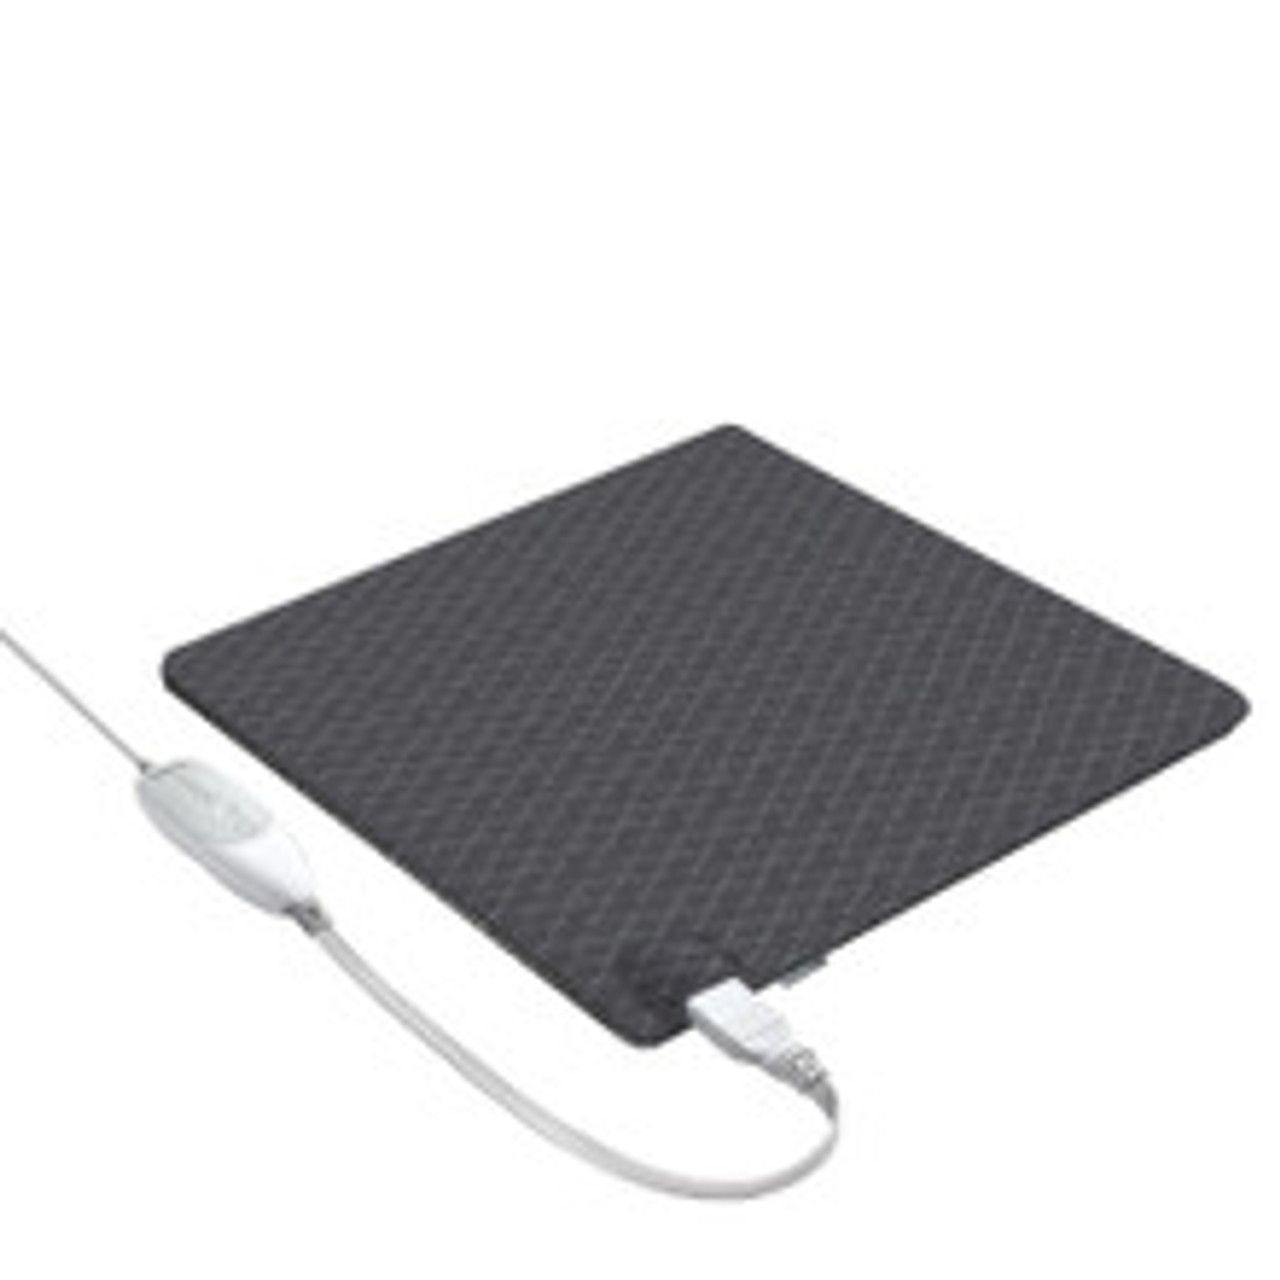 Heating Pad with Removable Cover (12” x 24”)